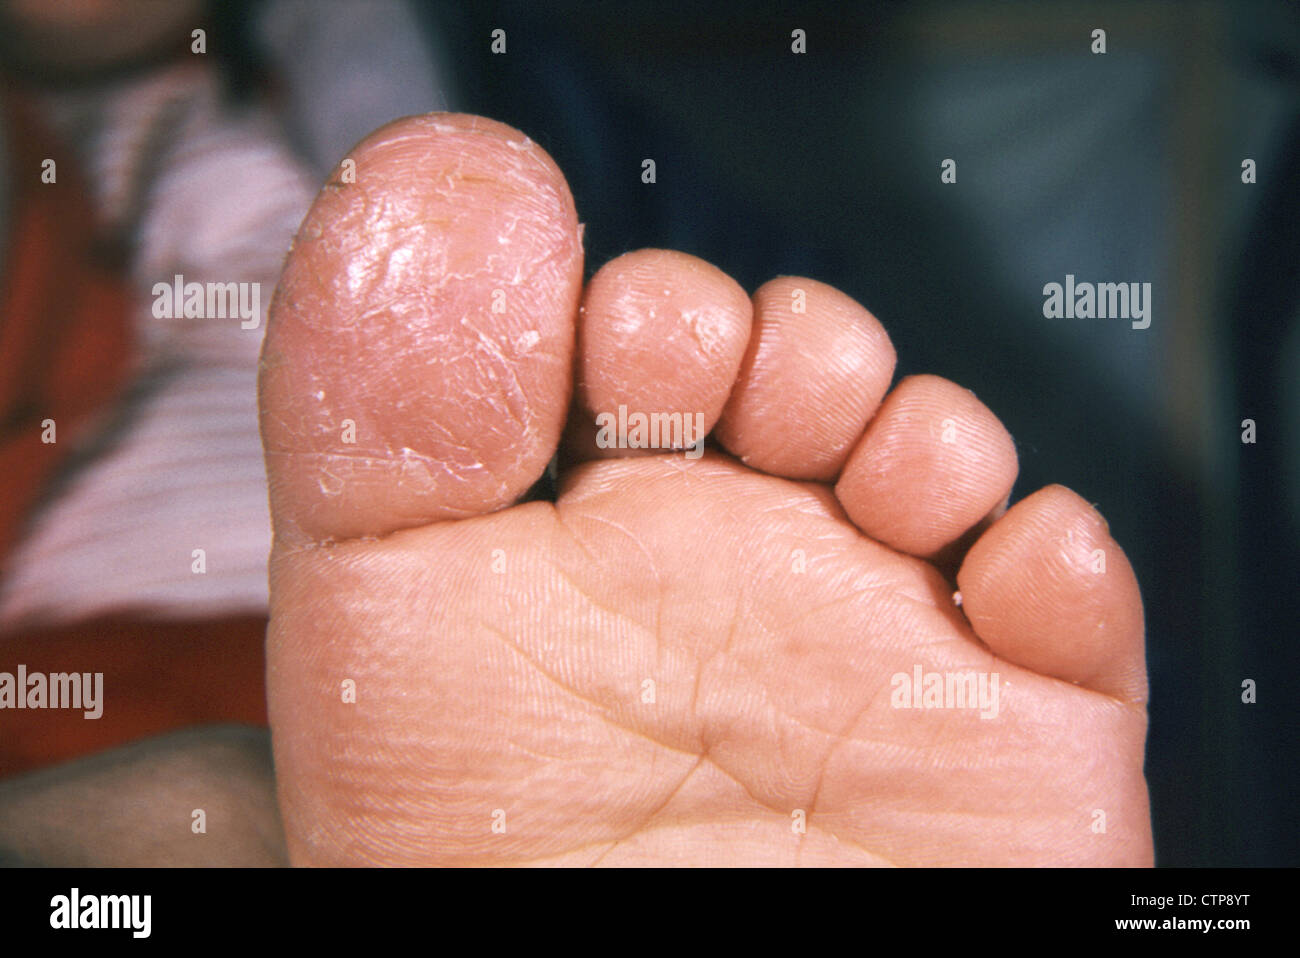 Geotrichum fungus infection of the great toe. Stock Photo